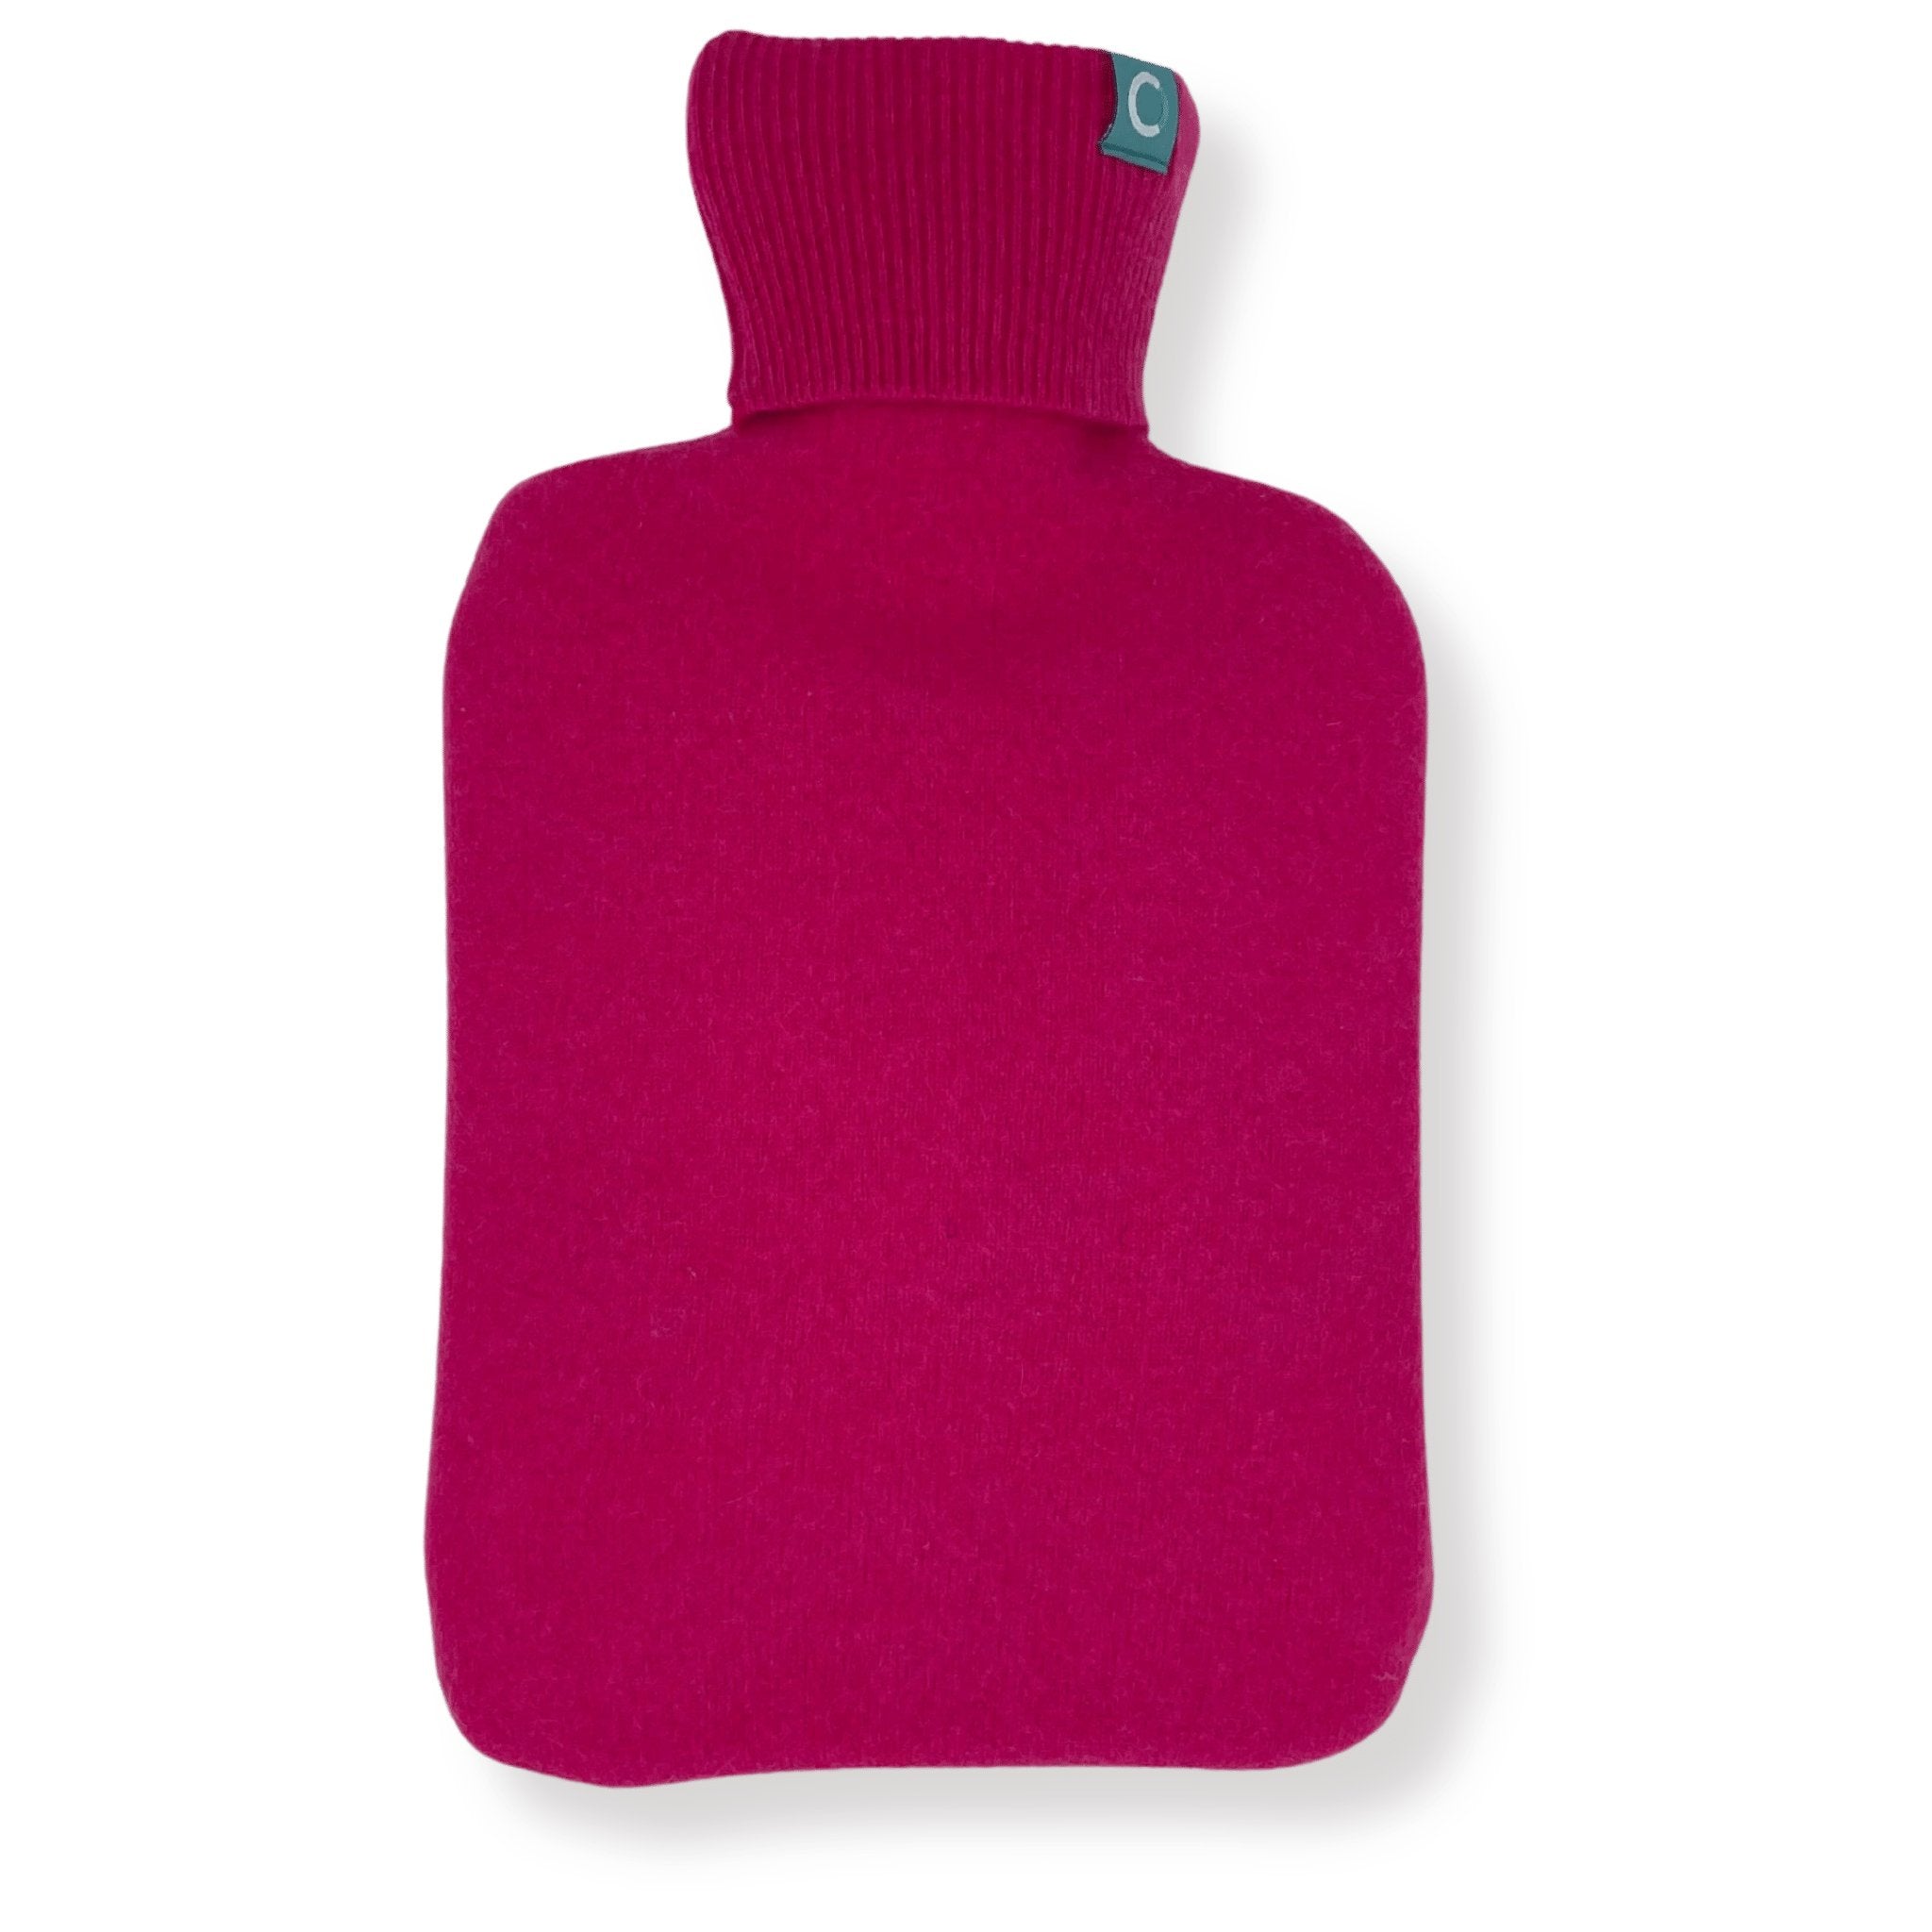 Recycled Cashmere Hot-water Bottle Cover - Bright Pink - Cashmere Circle